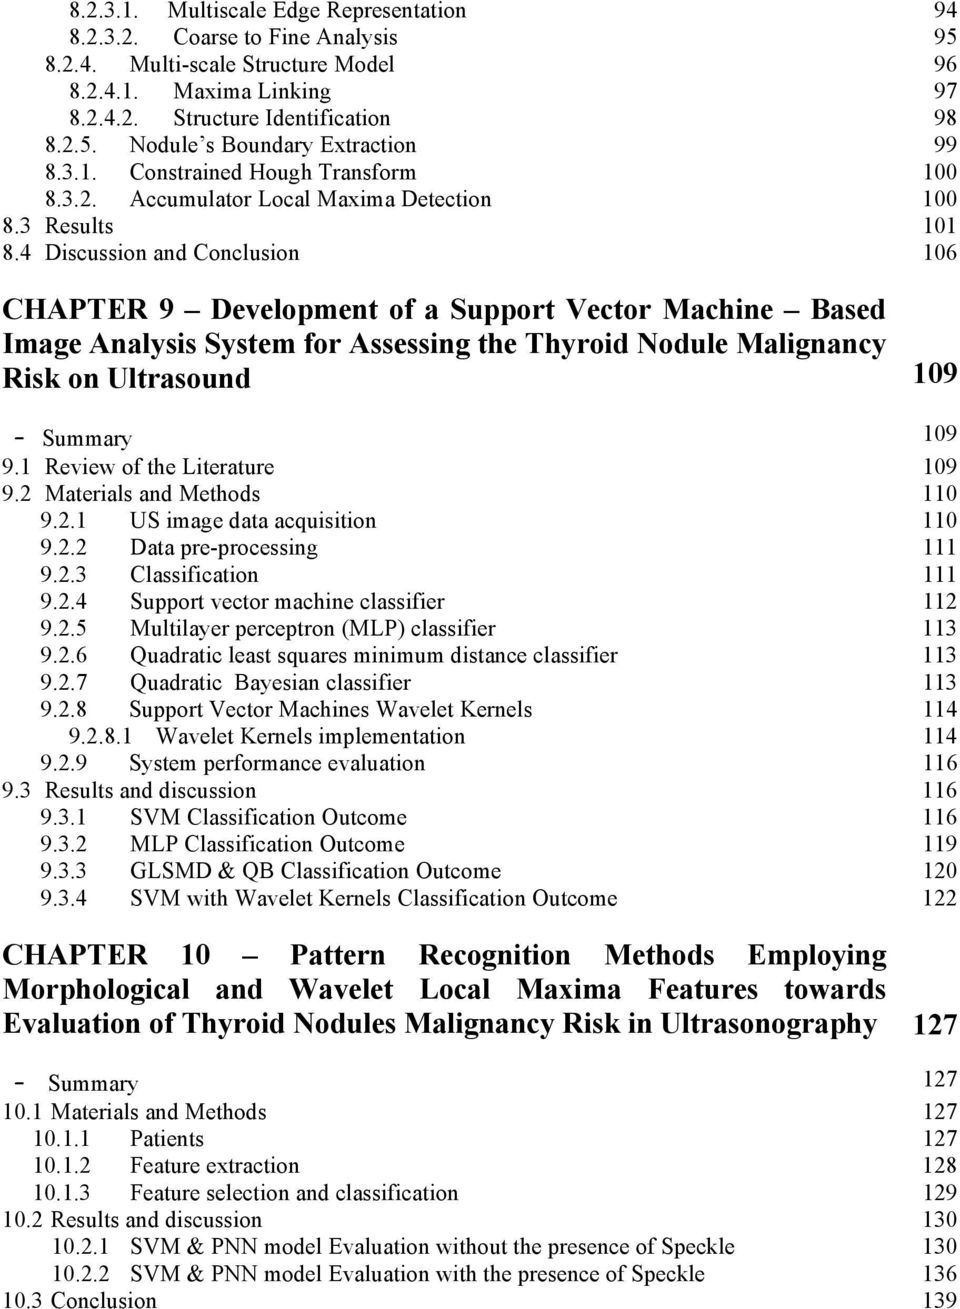 4 Discussion and Conclusion 106 CHAPTER 9 Development of a Support Vector Machine Based Image Analysis System for Assessing the Thyroid Nodule Malignancy Risk on Ultrasound 109 Summary 109 9.